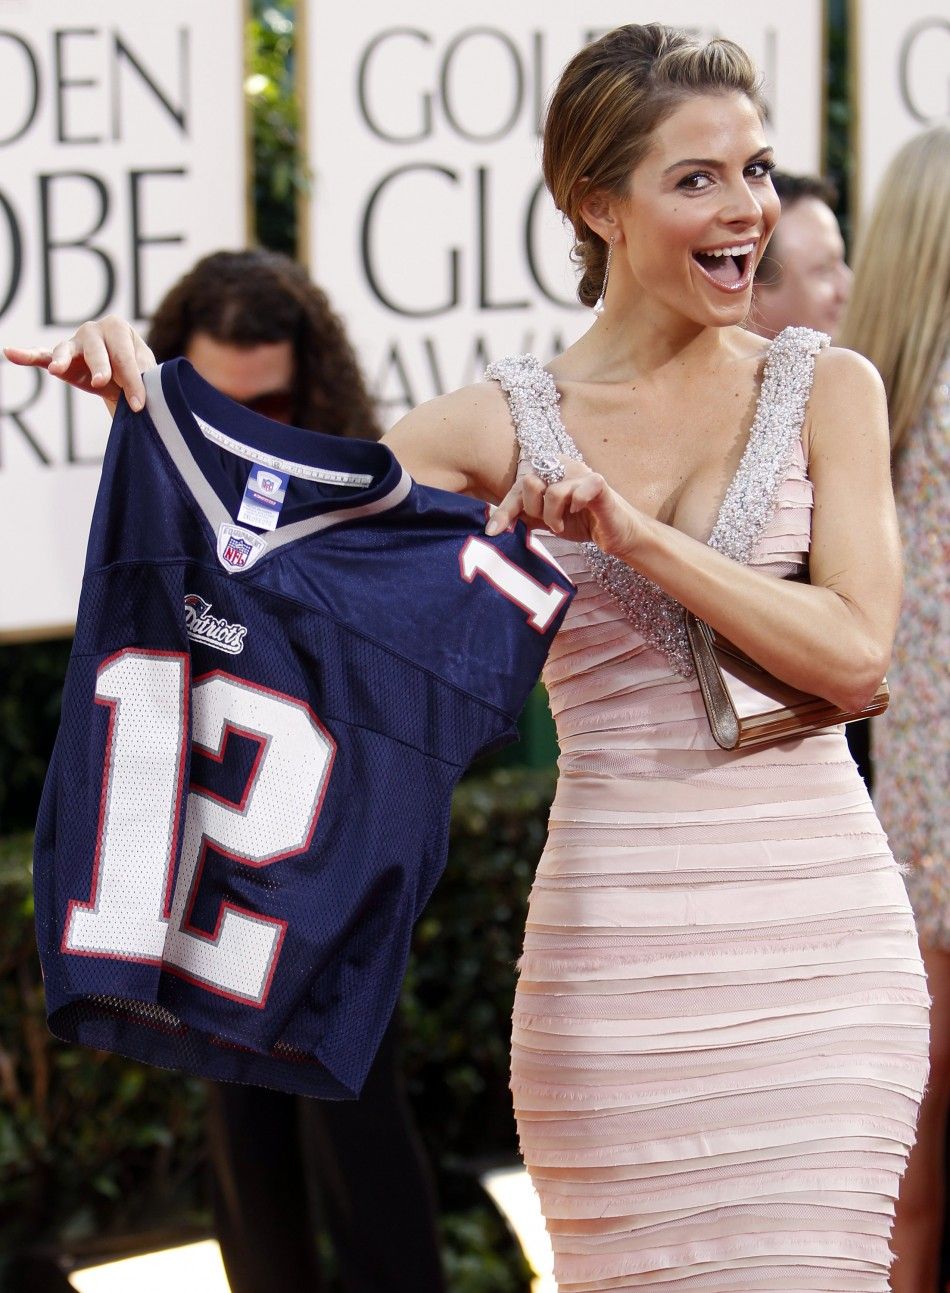 Actress Maria Menounos holds up a Tom Brady Patriots jersey as she arrives at the 68th annual Golden Globe Awards